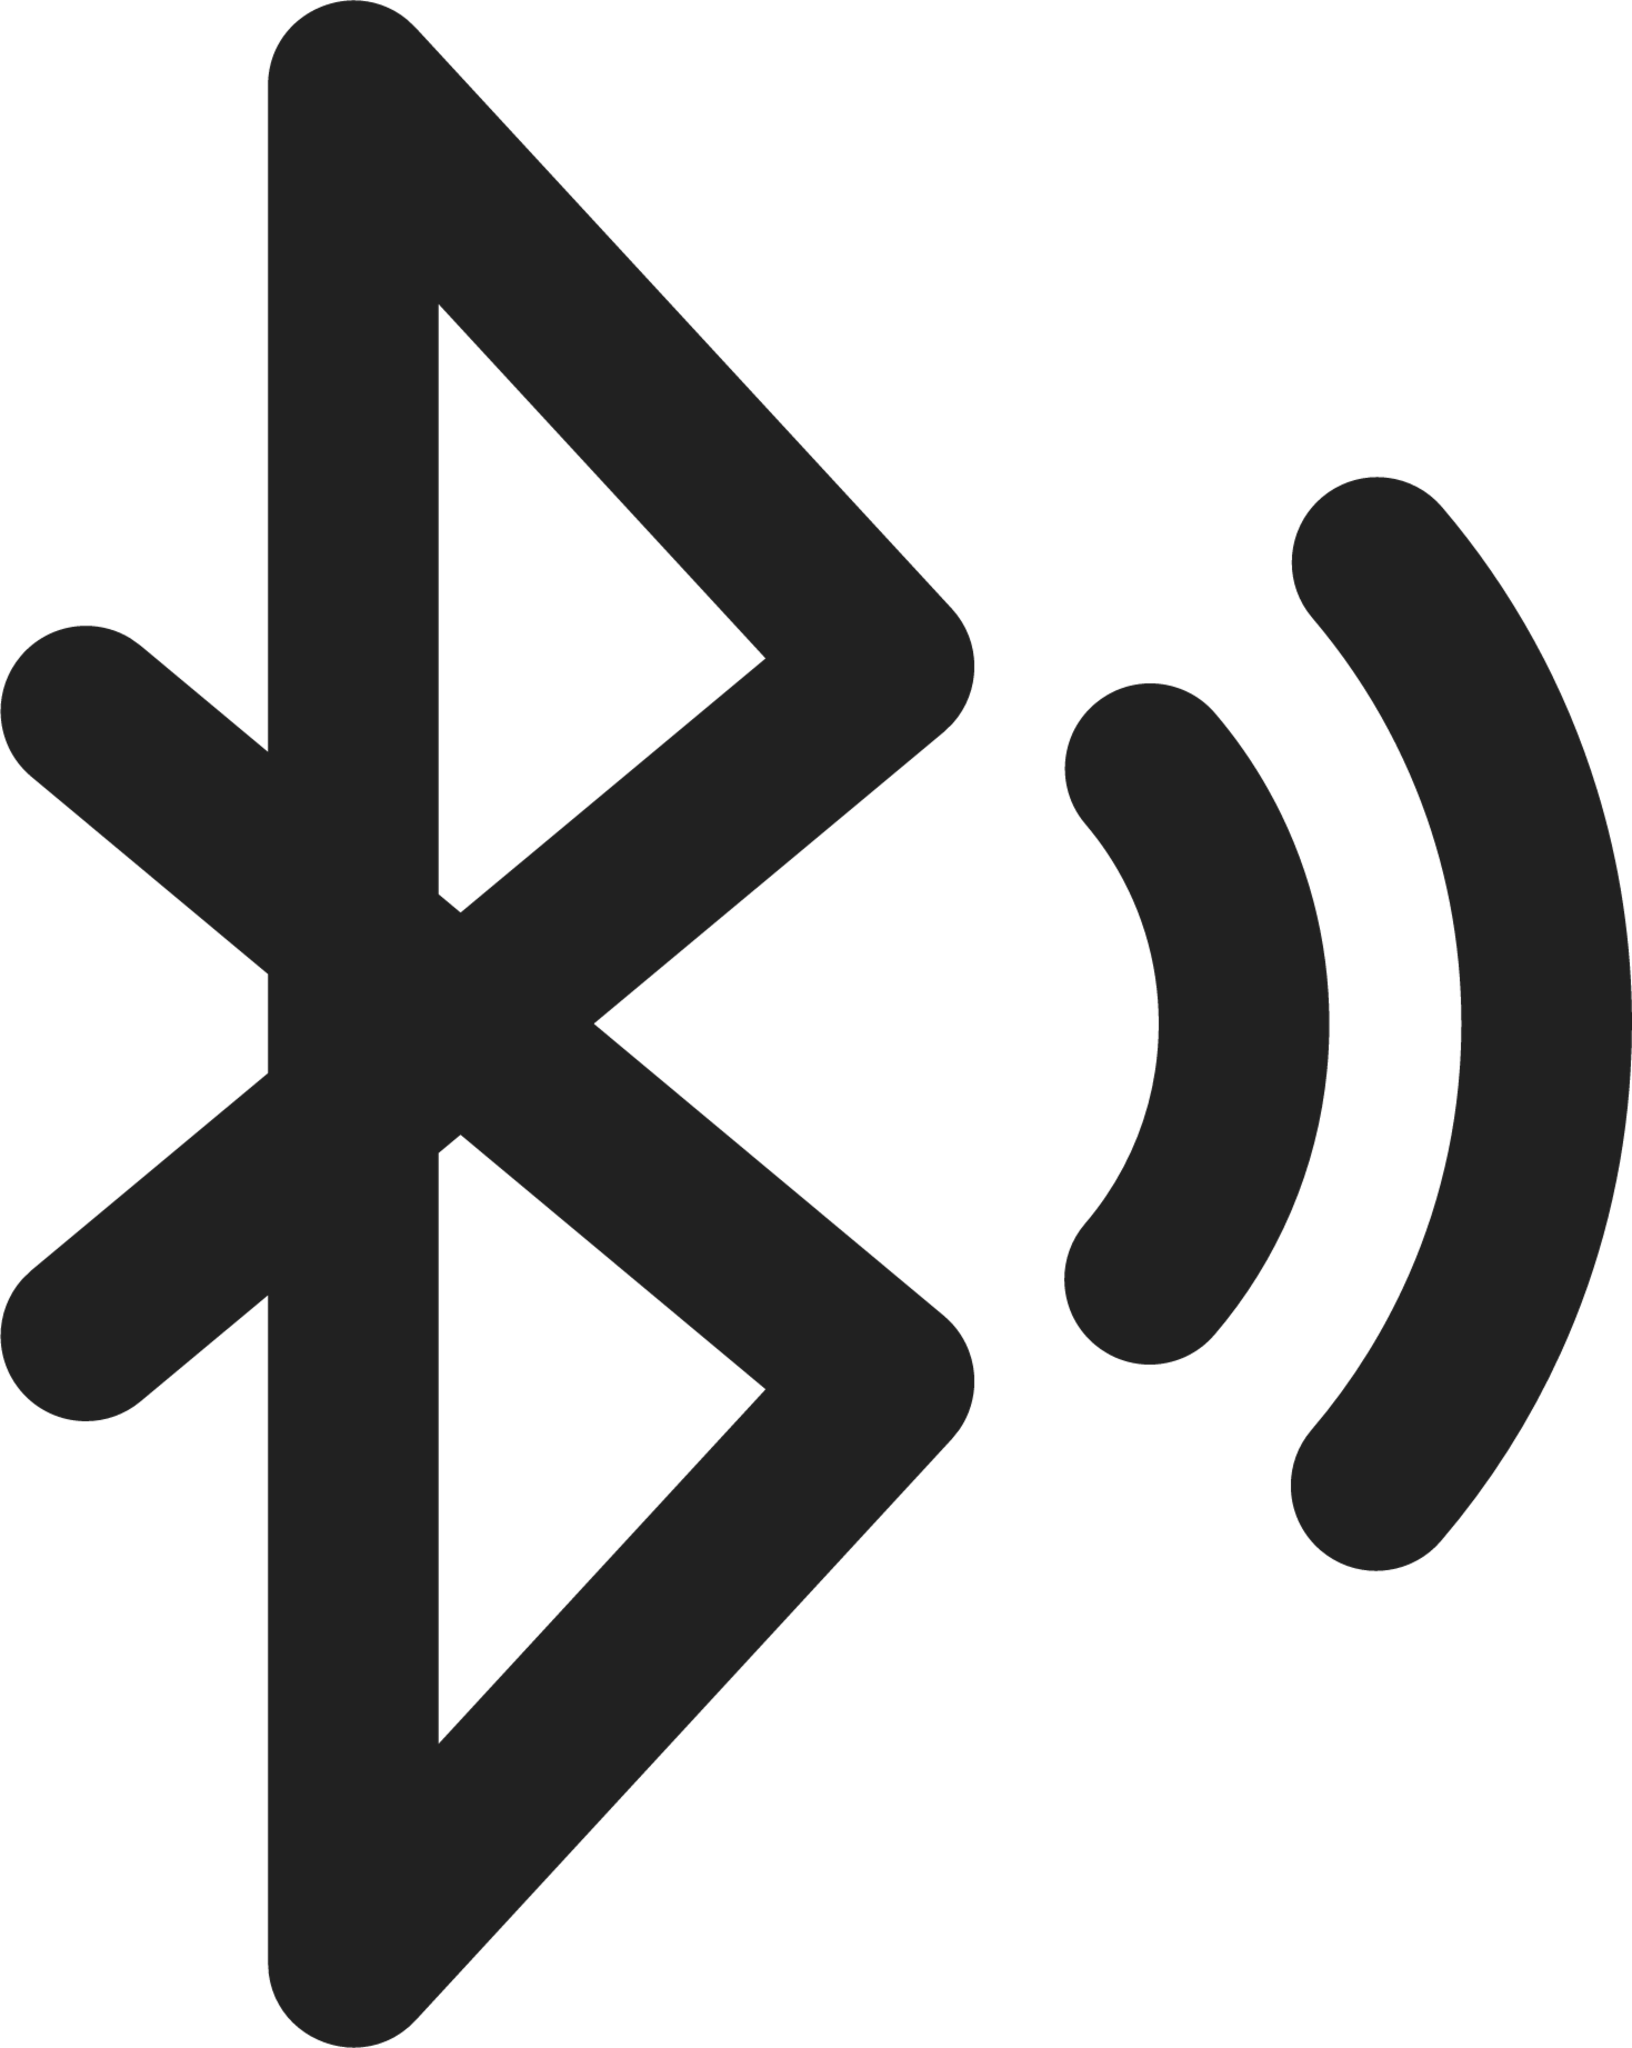 Bluetooth Searching icon